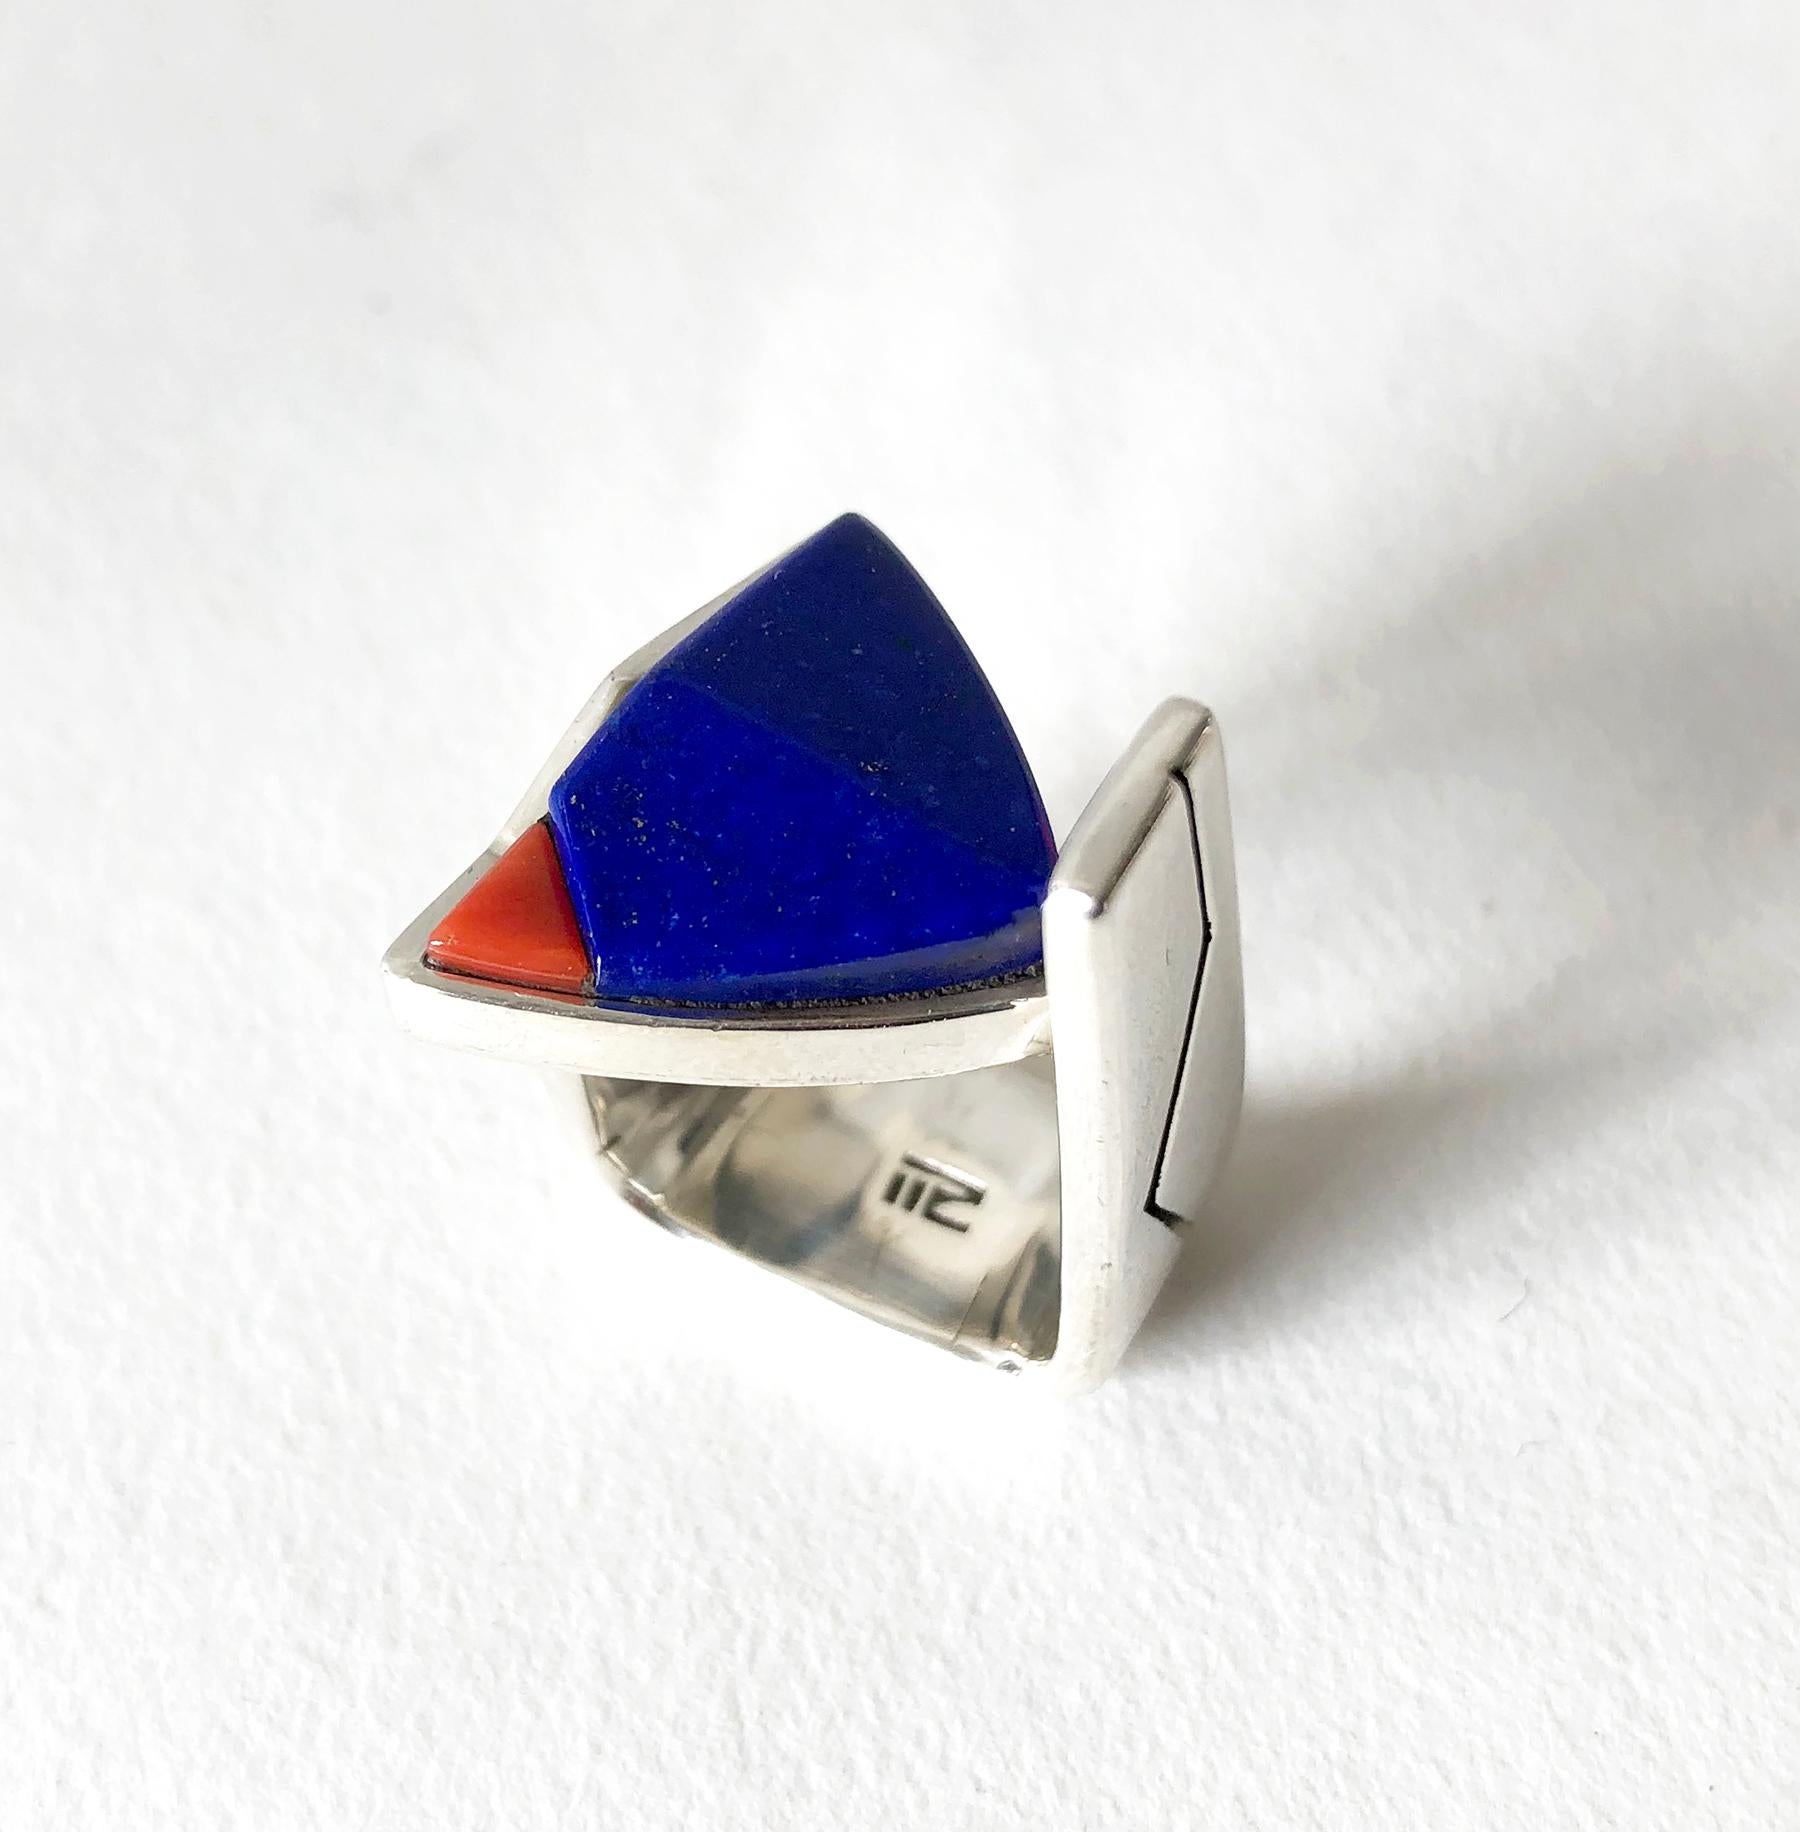 Vintage 1990's sterling silver ring with lapis lazuli and coral inlay by Richard Chavez.  Ring is a finger size 4 or so and is signed with a stylized 